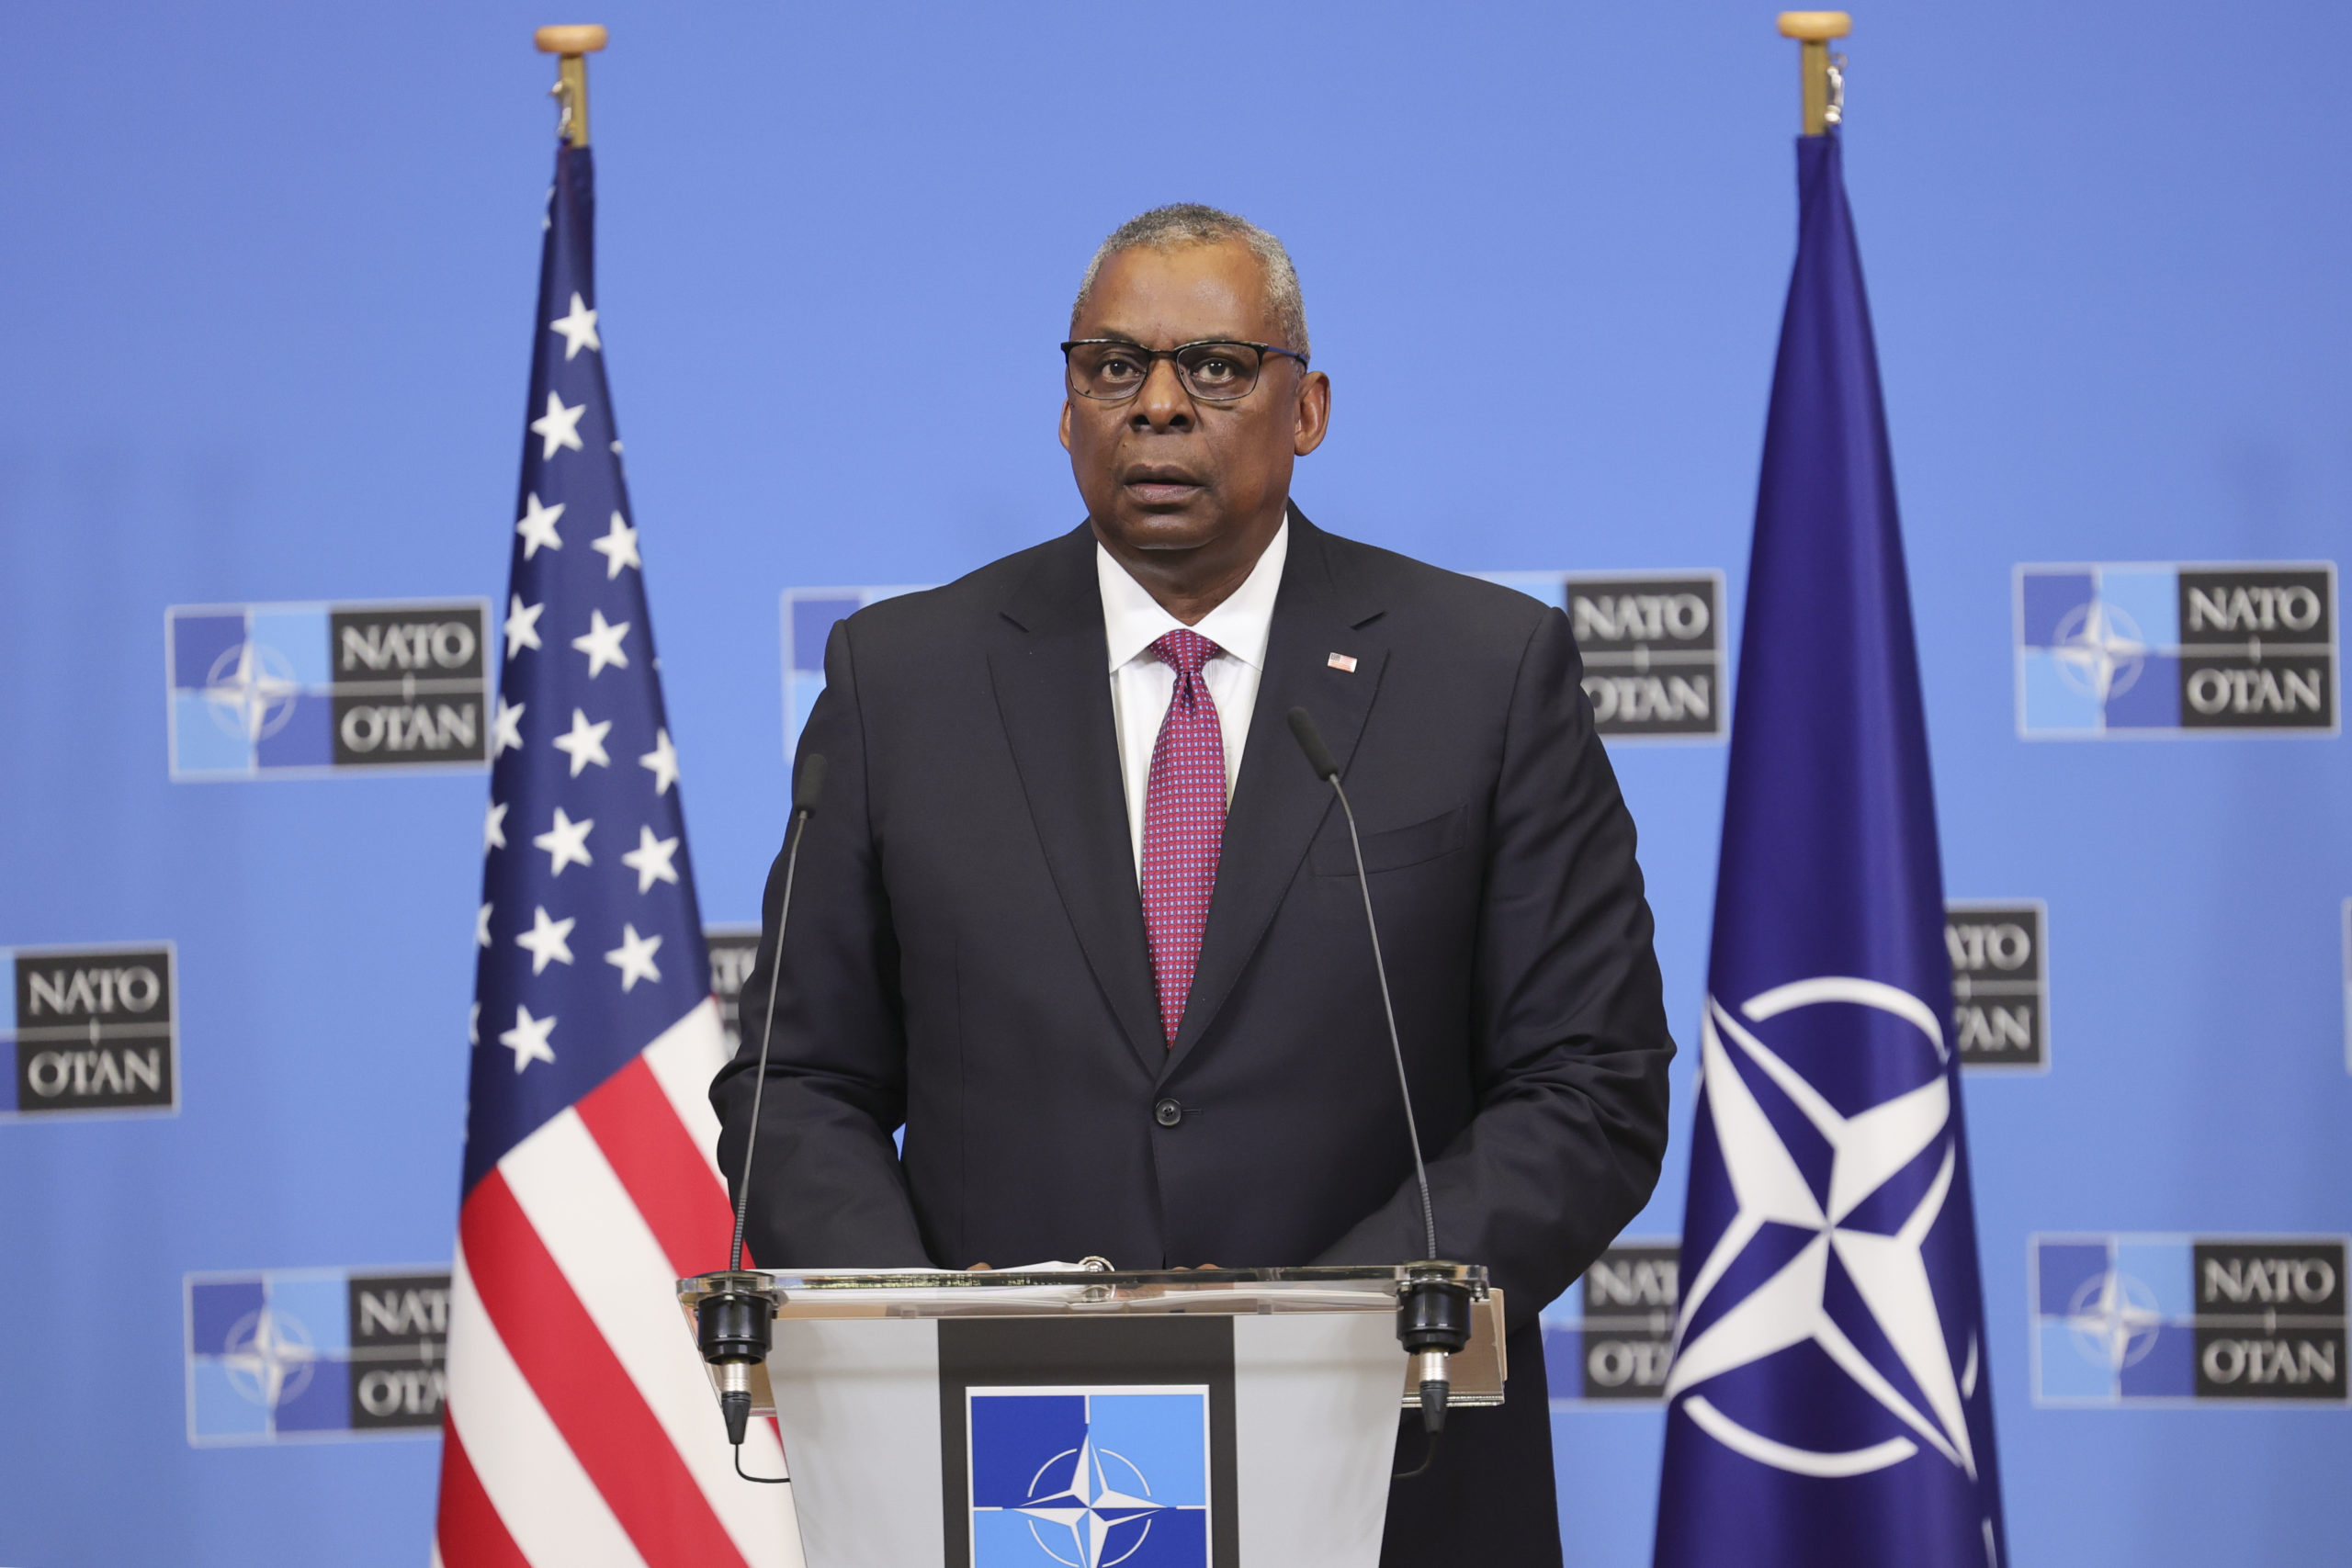 U.S. Secretary of Defense Lloyd Austin reads a statement following a NATO defense ministers meeting at NATO headquarters in Brussels, Wednesday.